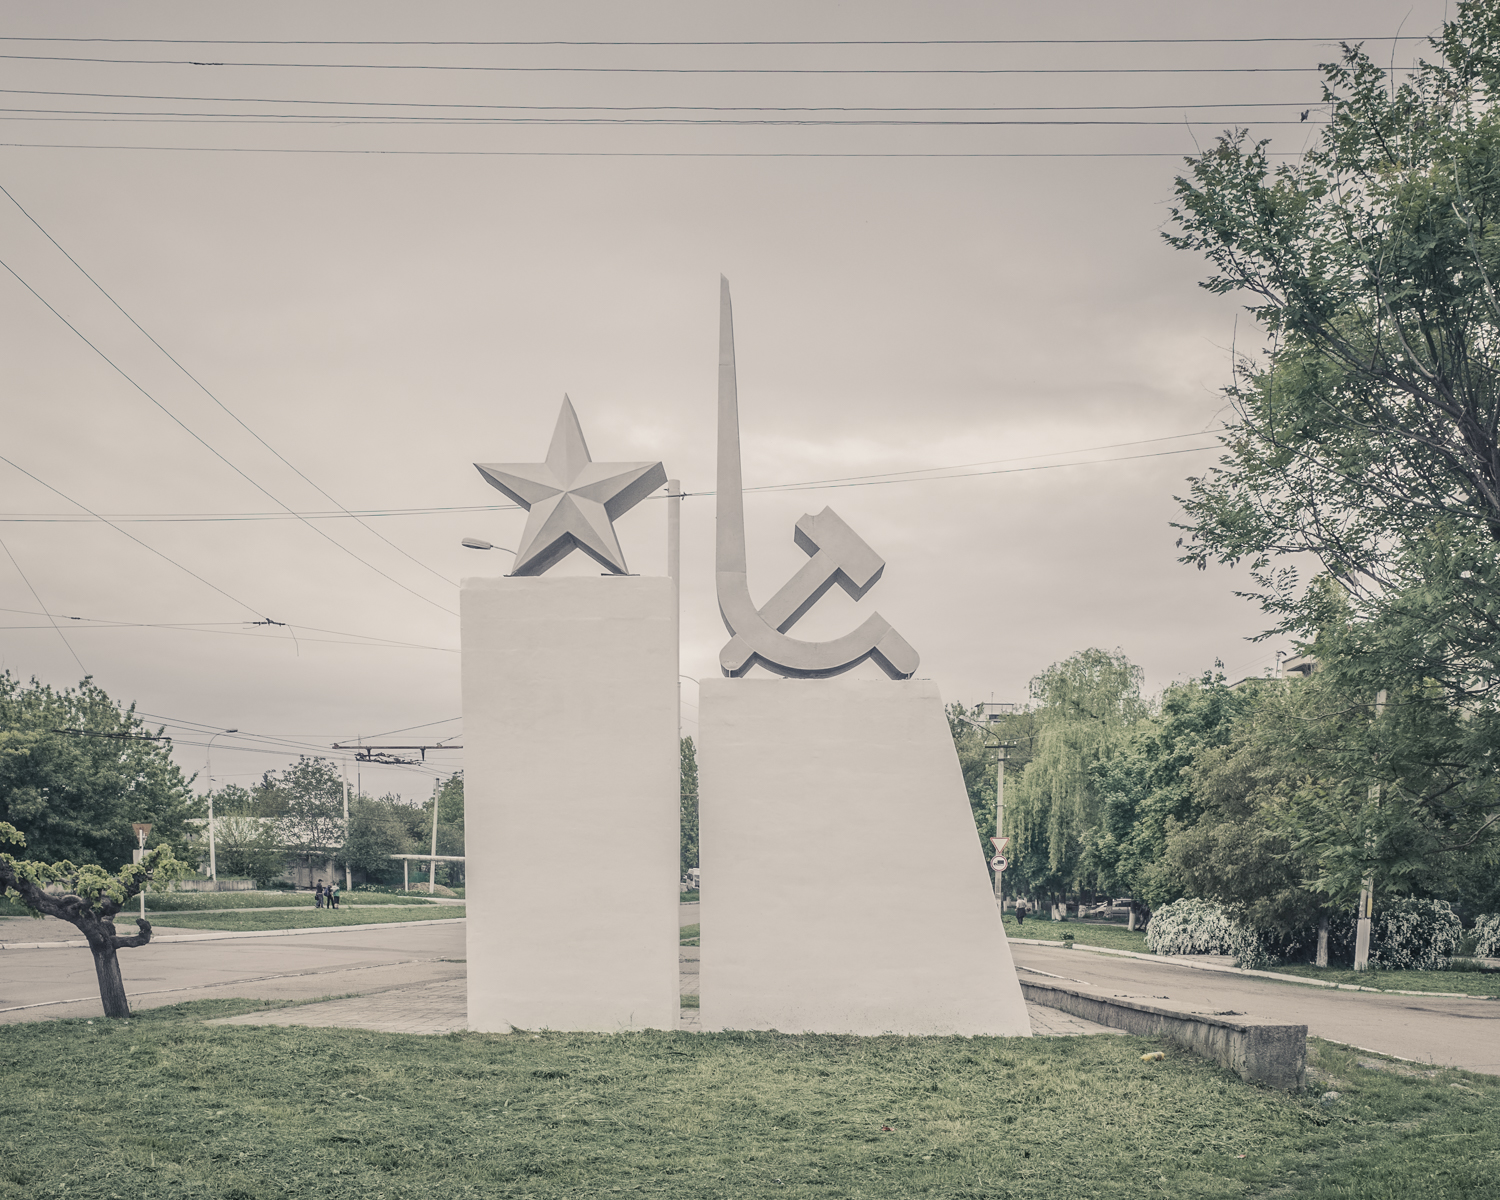   LINKS TO THE MOTHER LAND TRANSNISTRIA | 2015   When communism and Christianity go hand in hand on the roadside.   Transnistria is a narrow strip of land wedged between the Dniester River and the Ukrainian border. Ghost state, Transnistria, 4200 km2